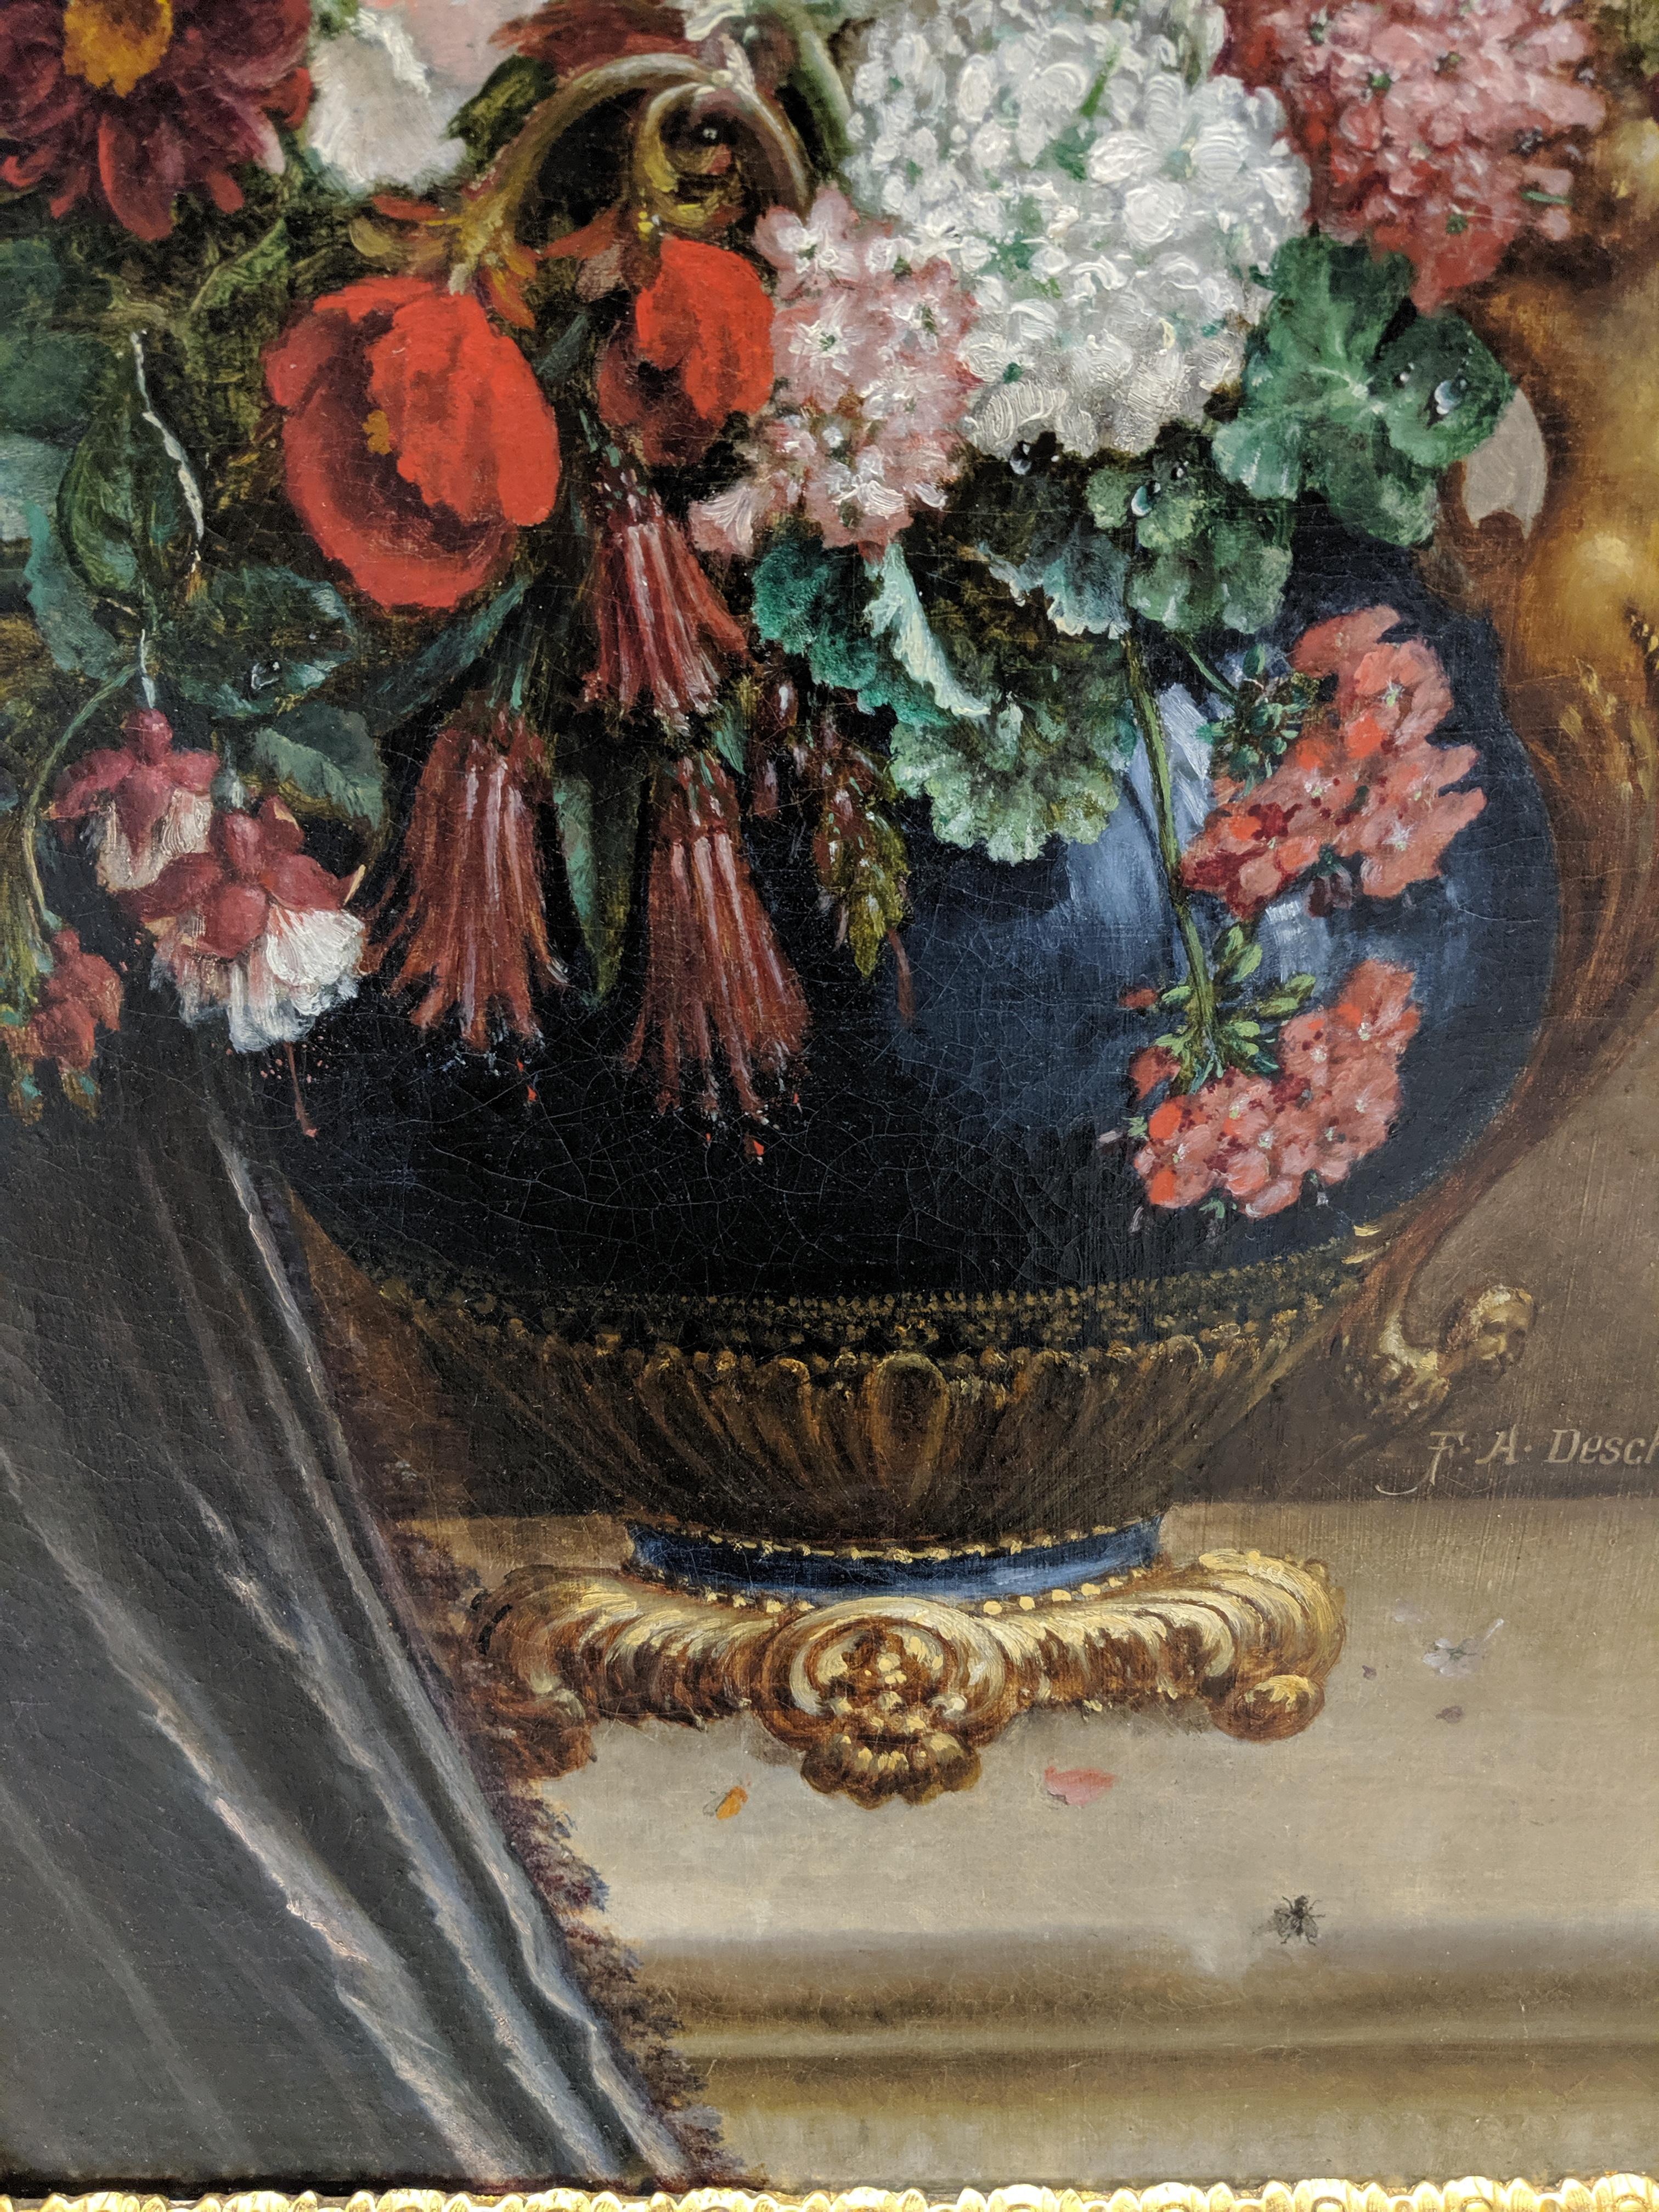 This painting is done in Oil on Canvas and is signed F. A. Deschamps and dated 93. It is a Still life with Flowers. The painting is 39 1/2